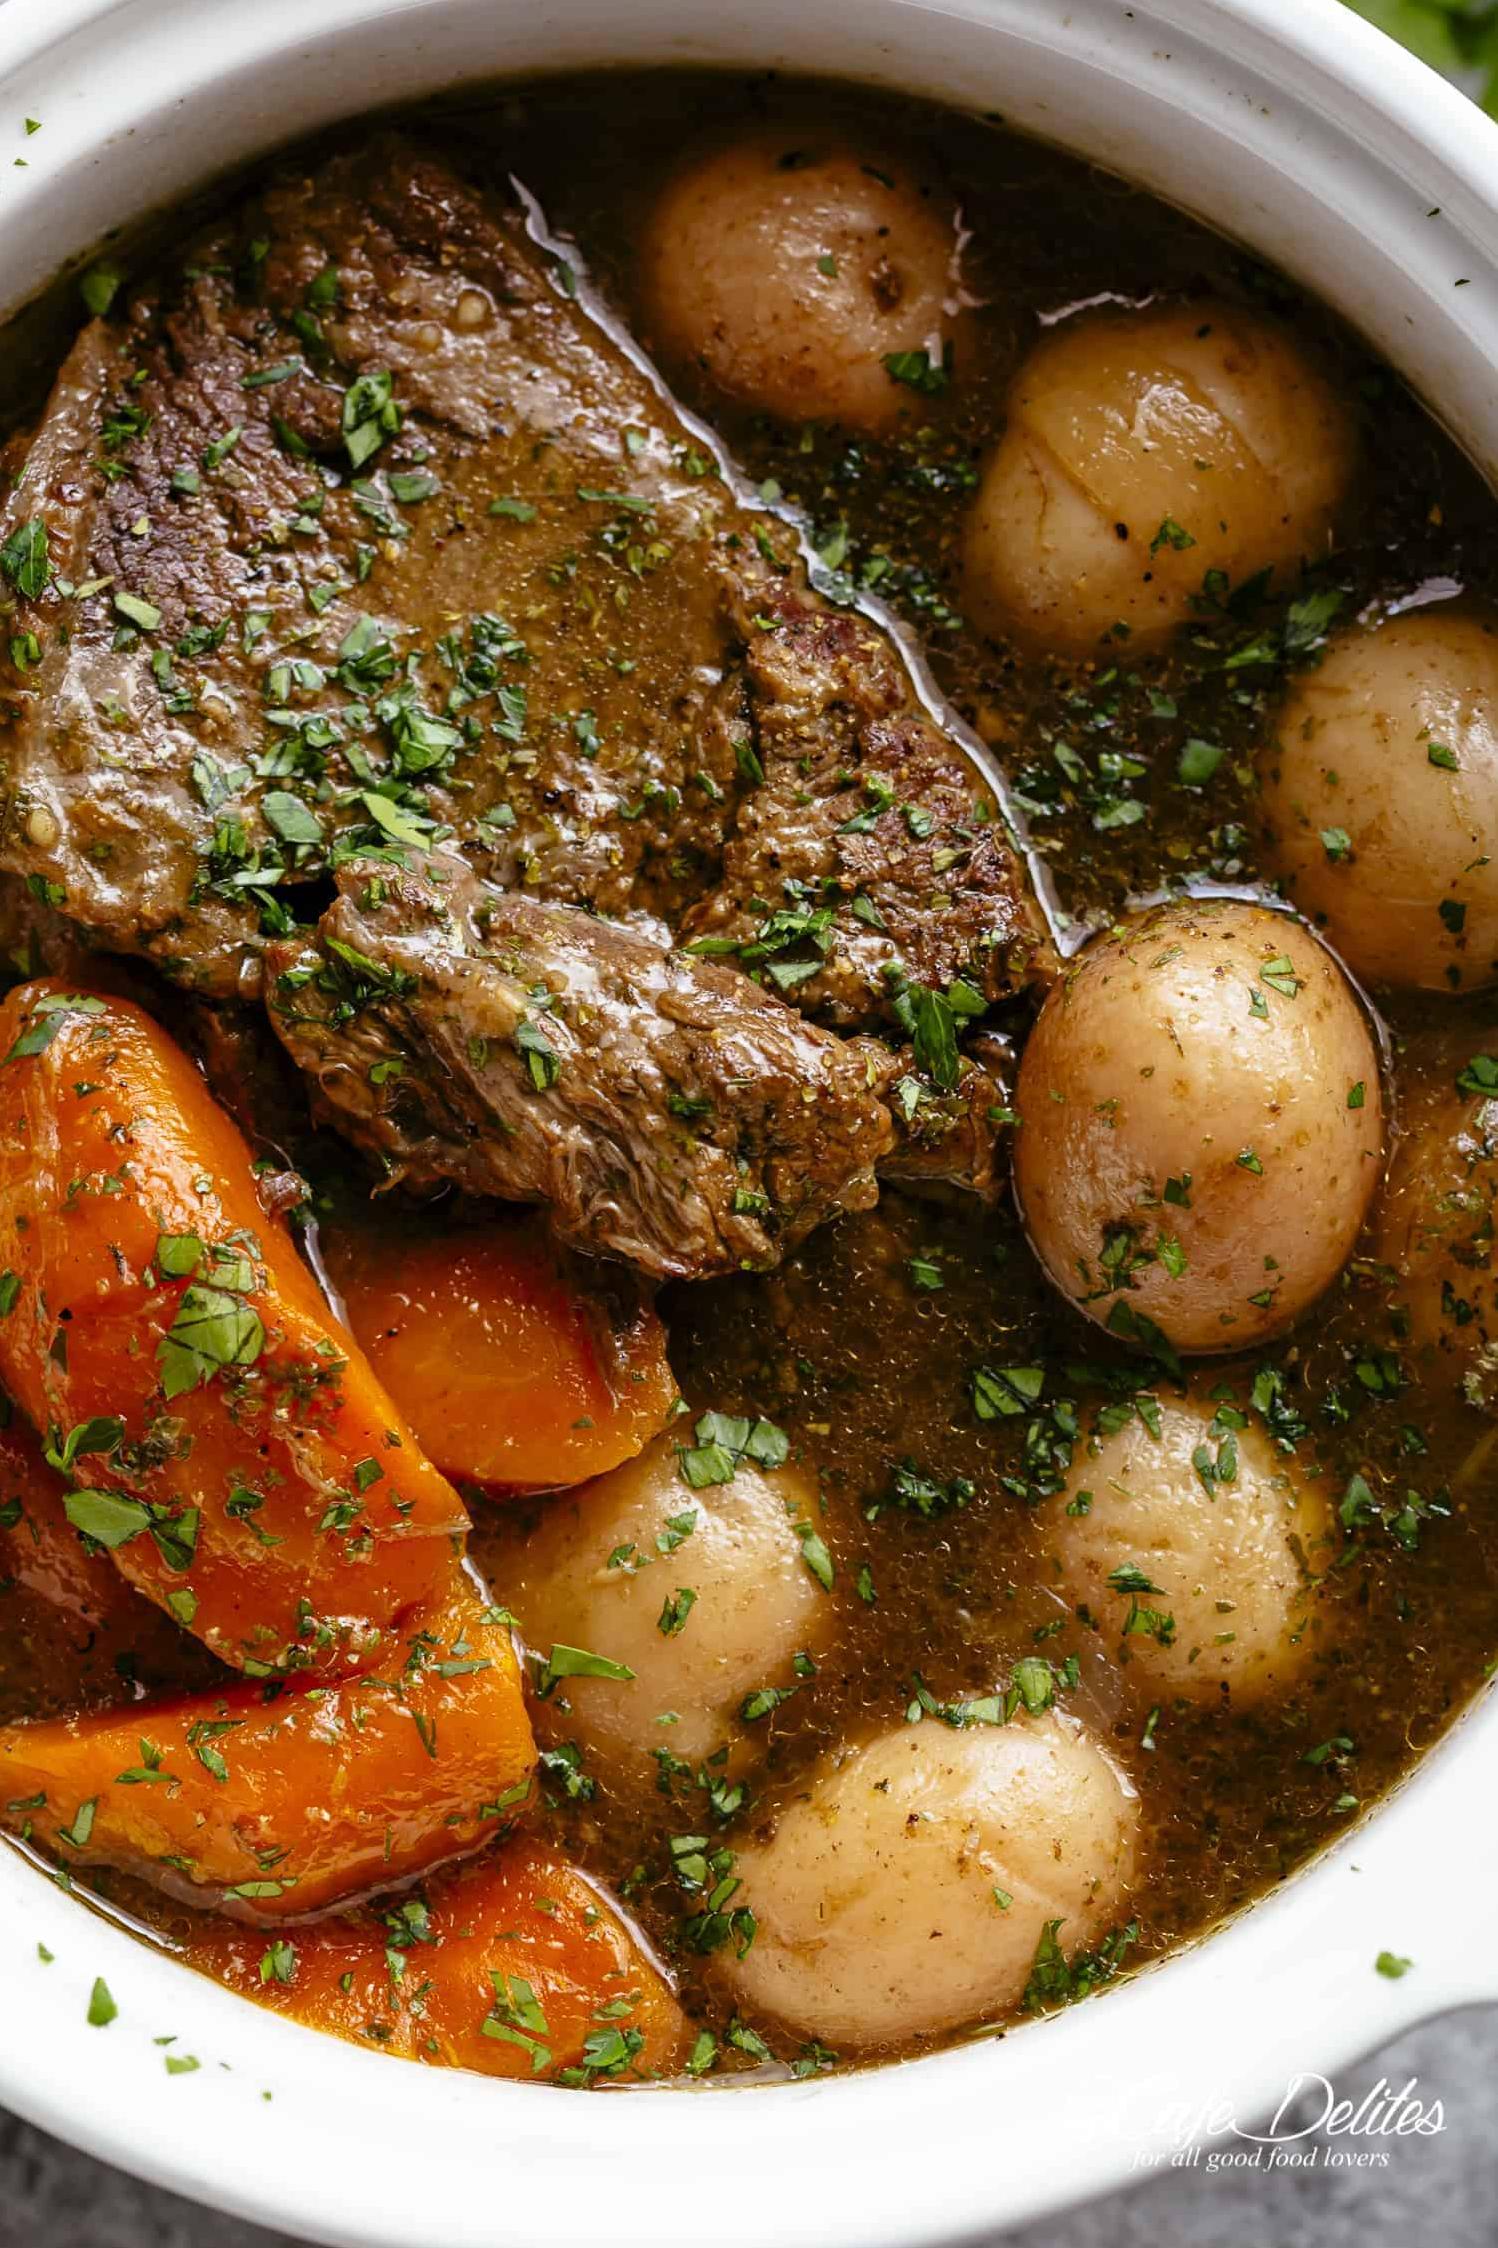  Cook smarter not harder with this delicious crockpot recipe.